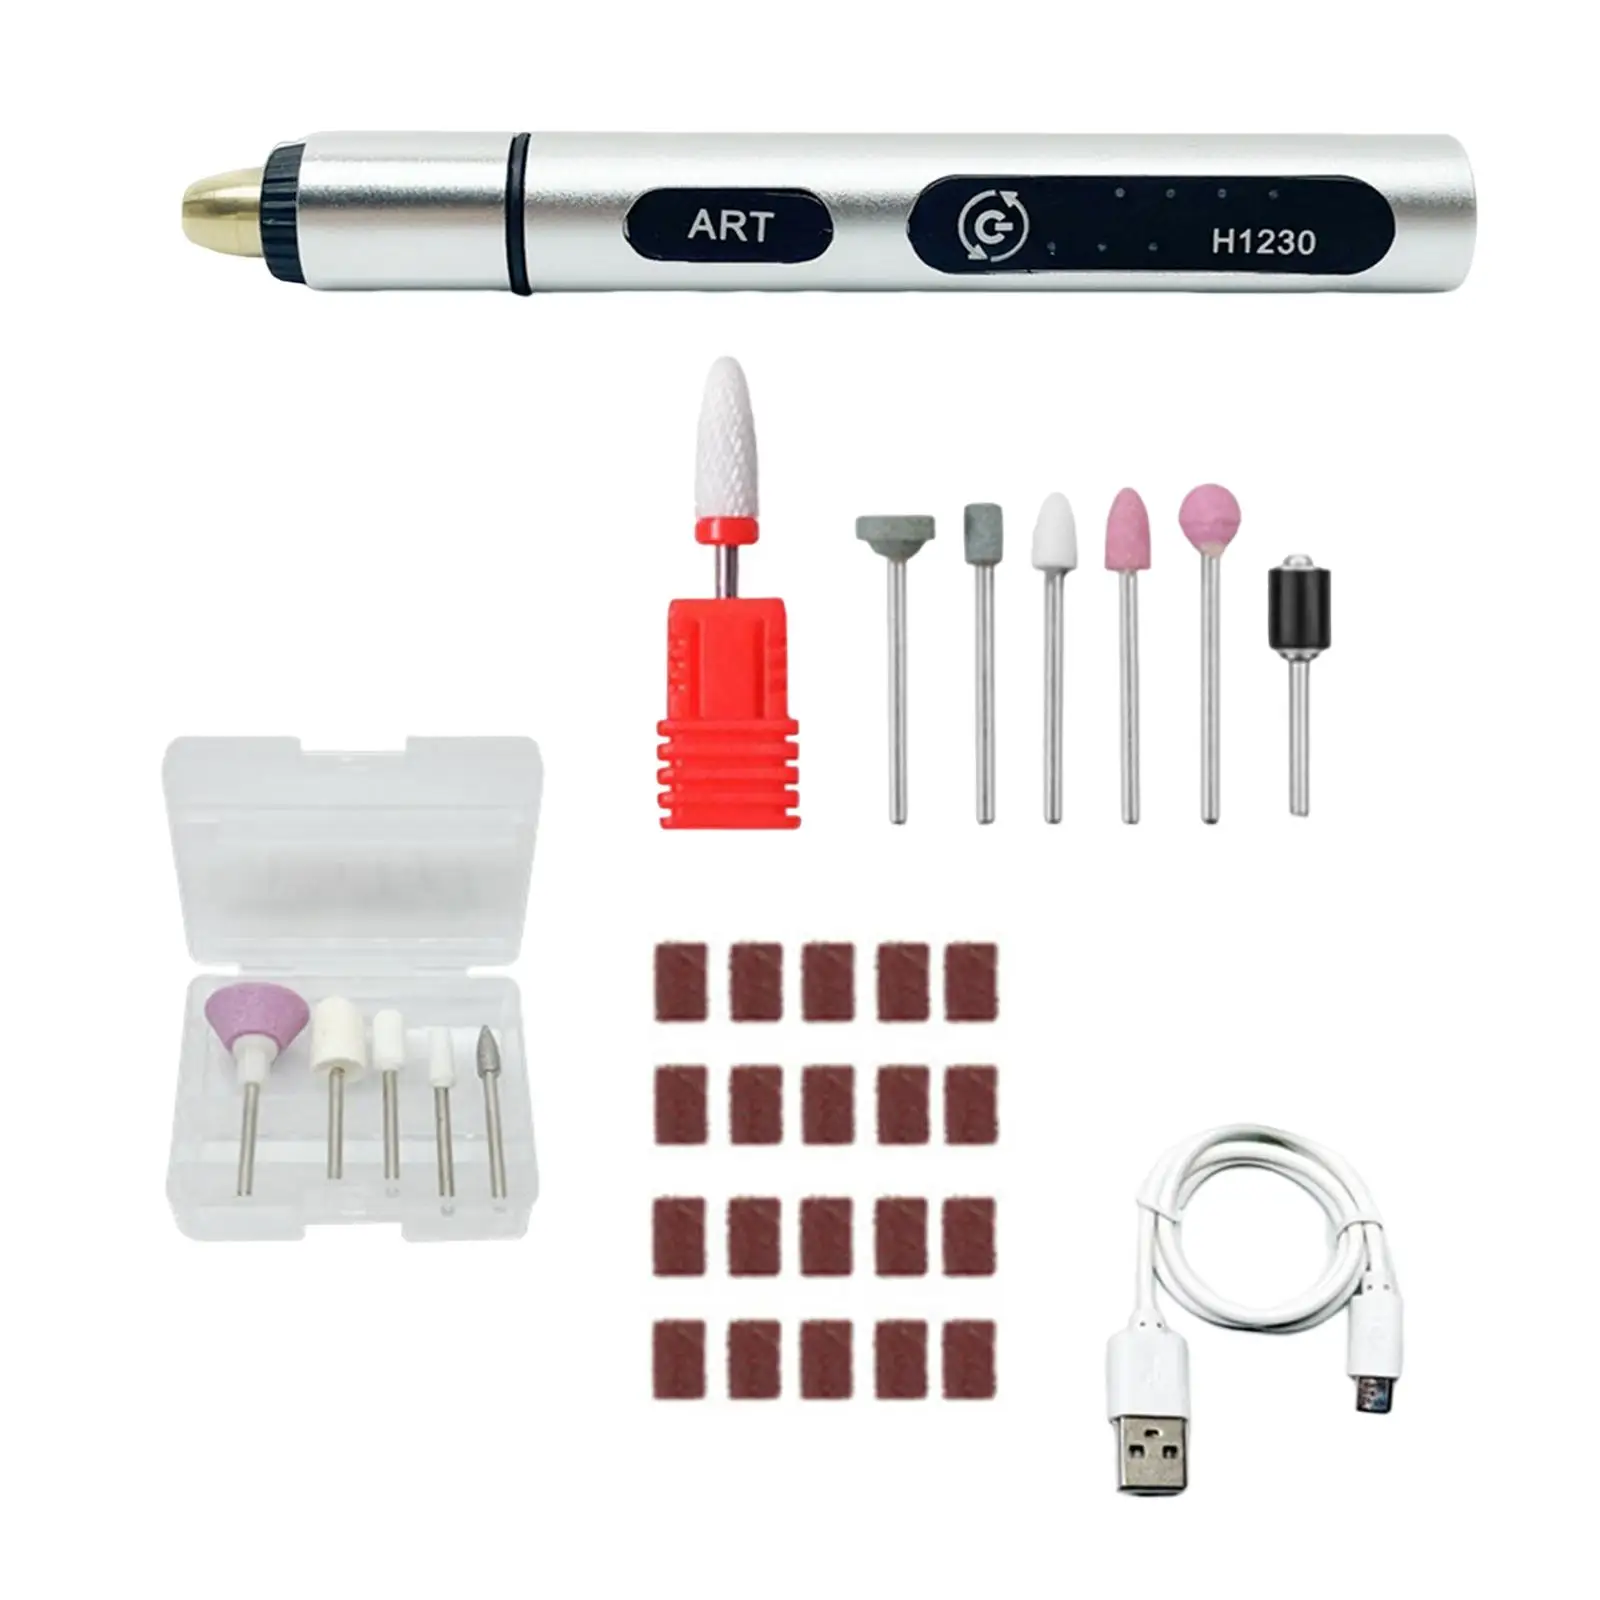 Electric Nail File Drill Kit USB Charging Pedicure Manicure Pen Sander Polisher Mini DIY Engraving Tool Kit for Crafts Etching